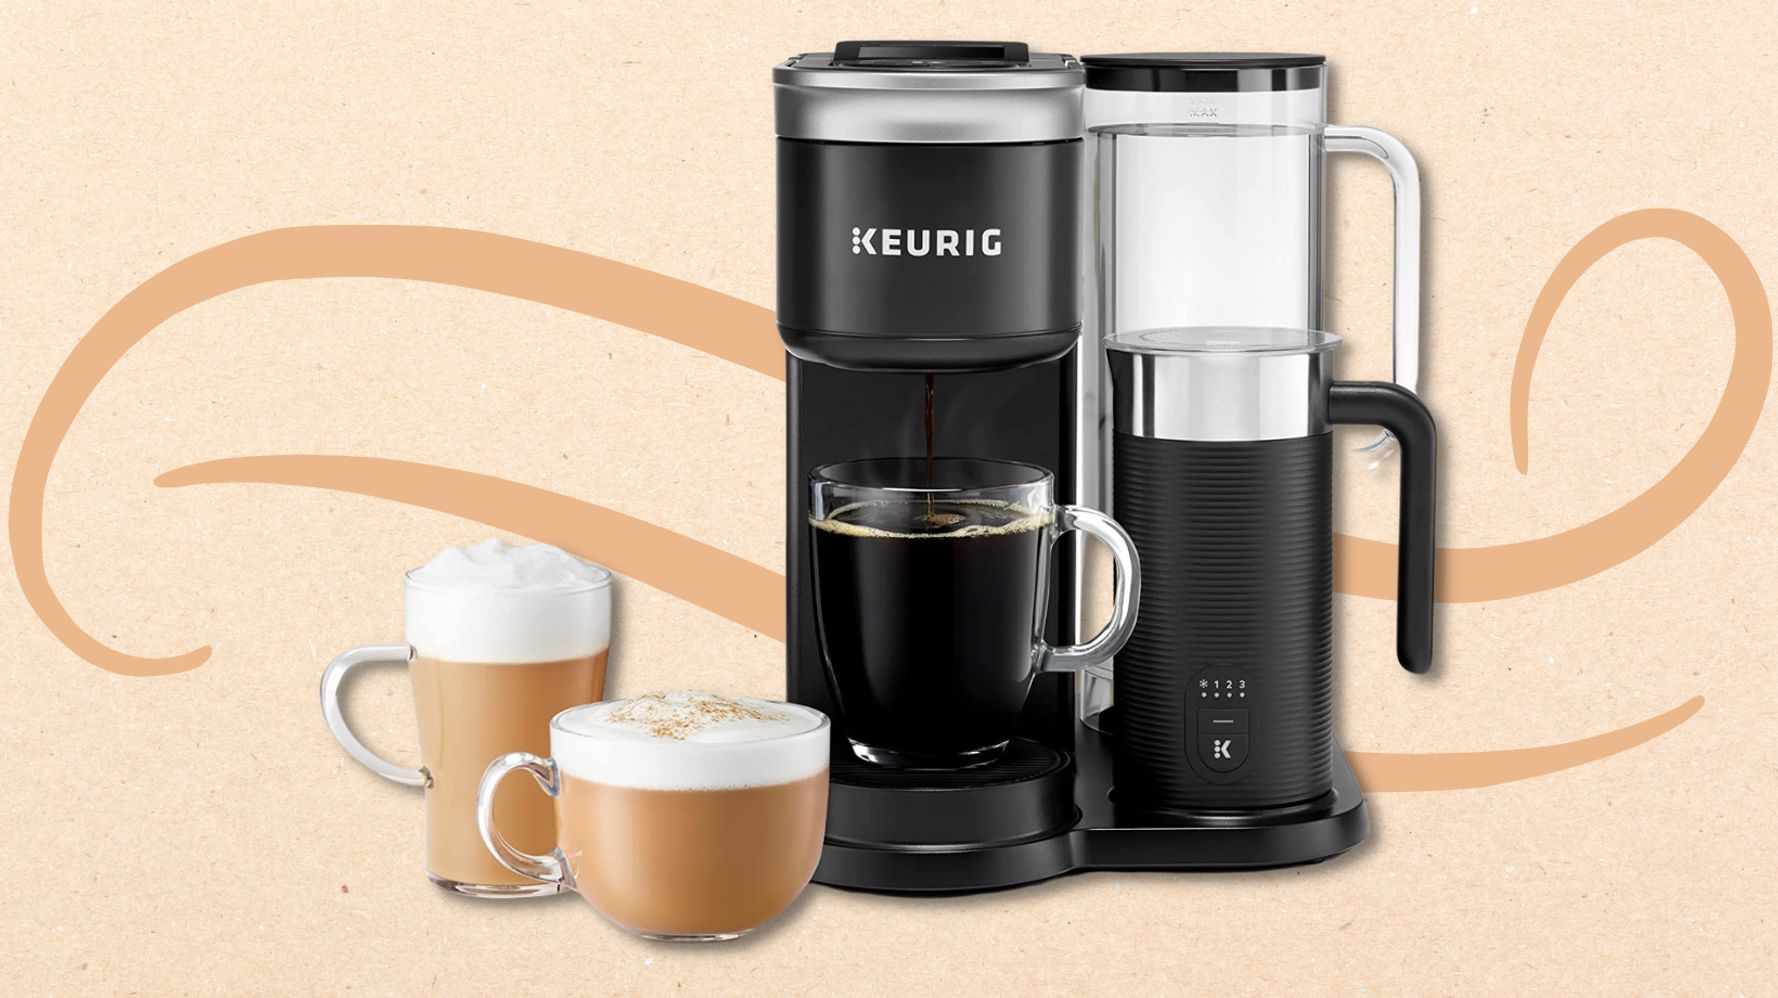 Keurig K-Duo Coffee Maker Review and Demonstration 